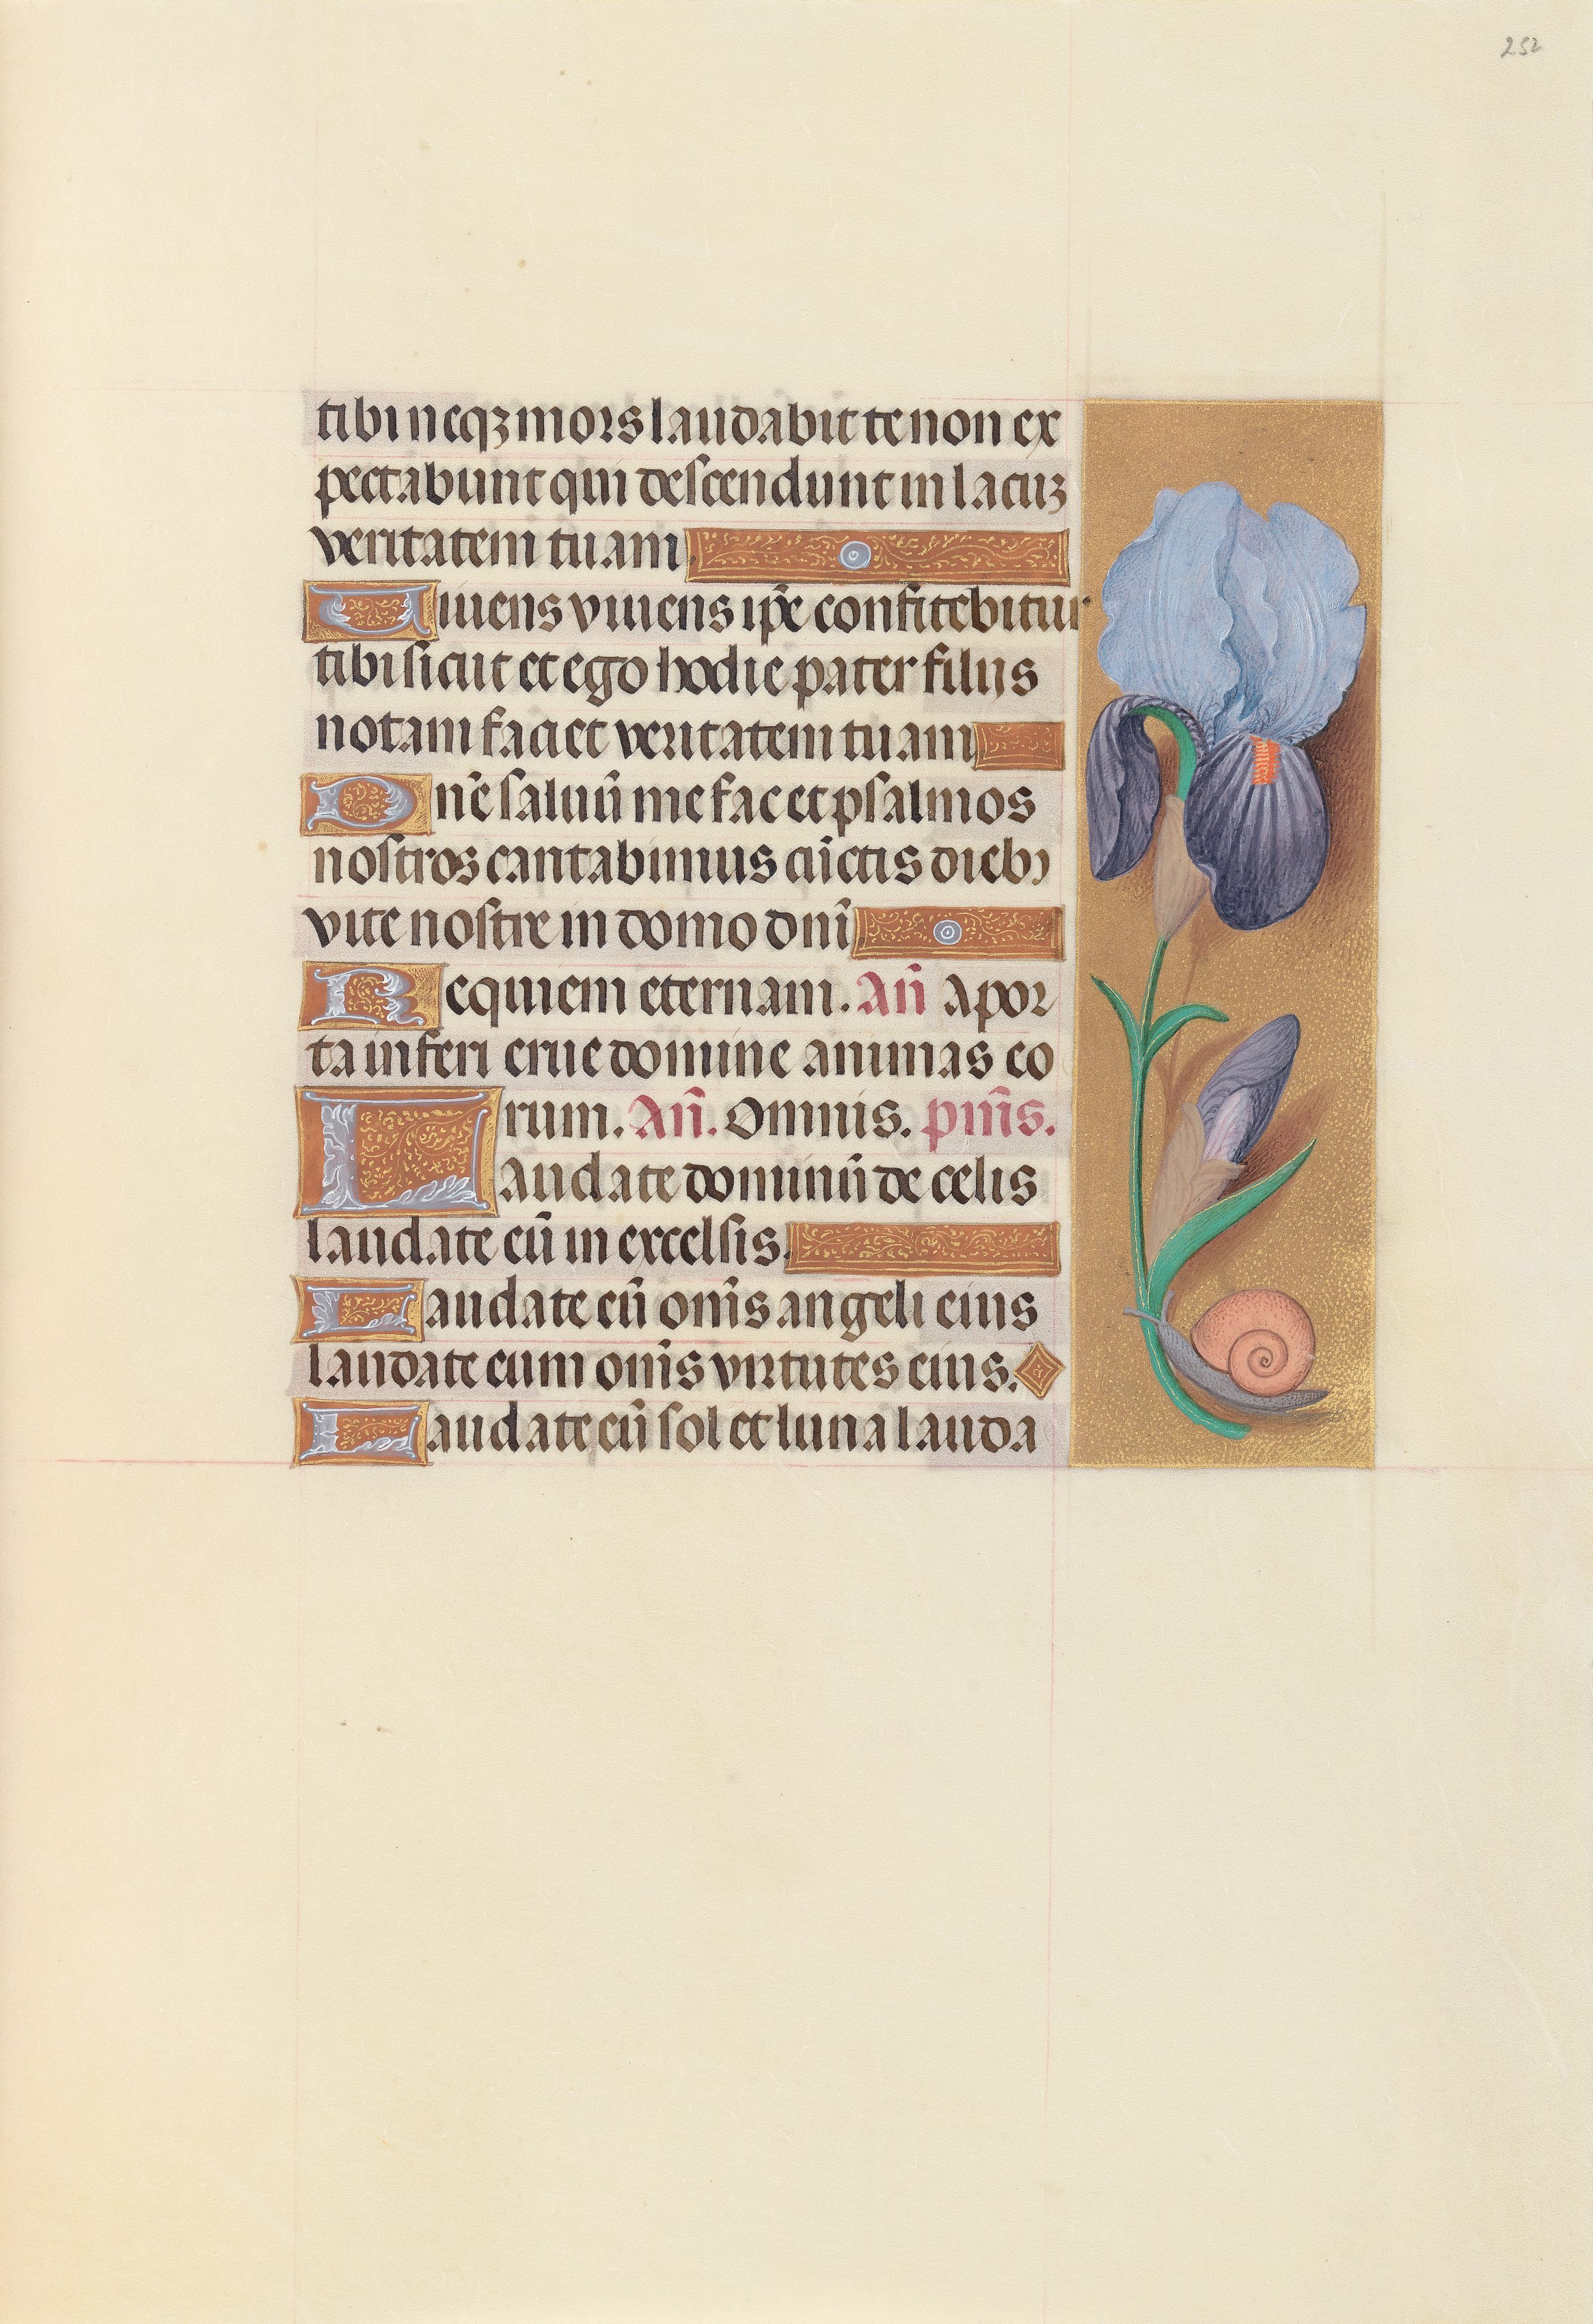 Hours of Queen Isabella the Catholic, Queen of Spain:  Fol. 252r